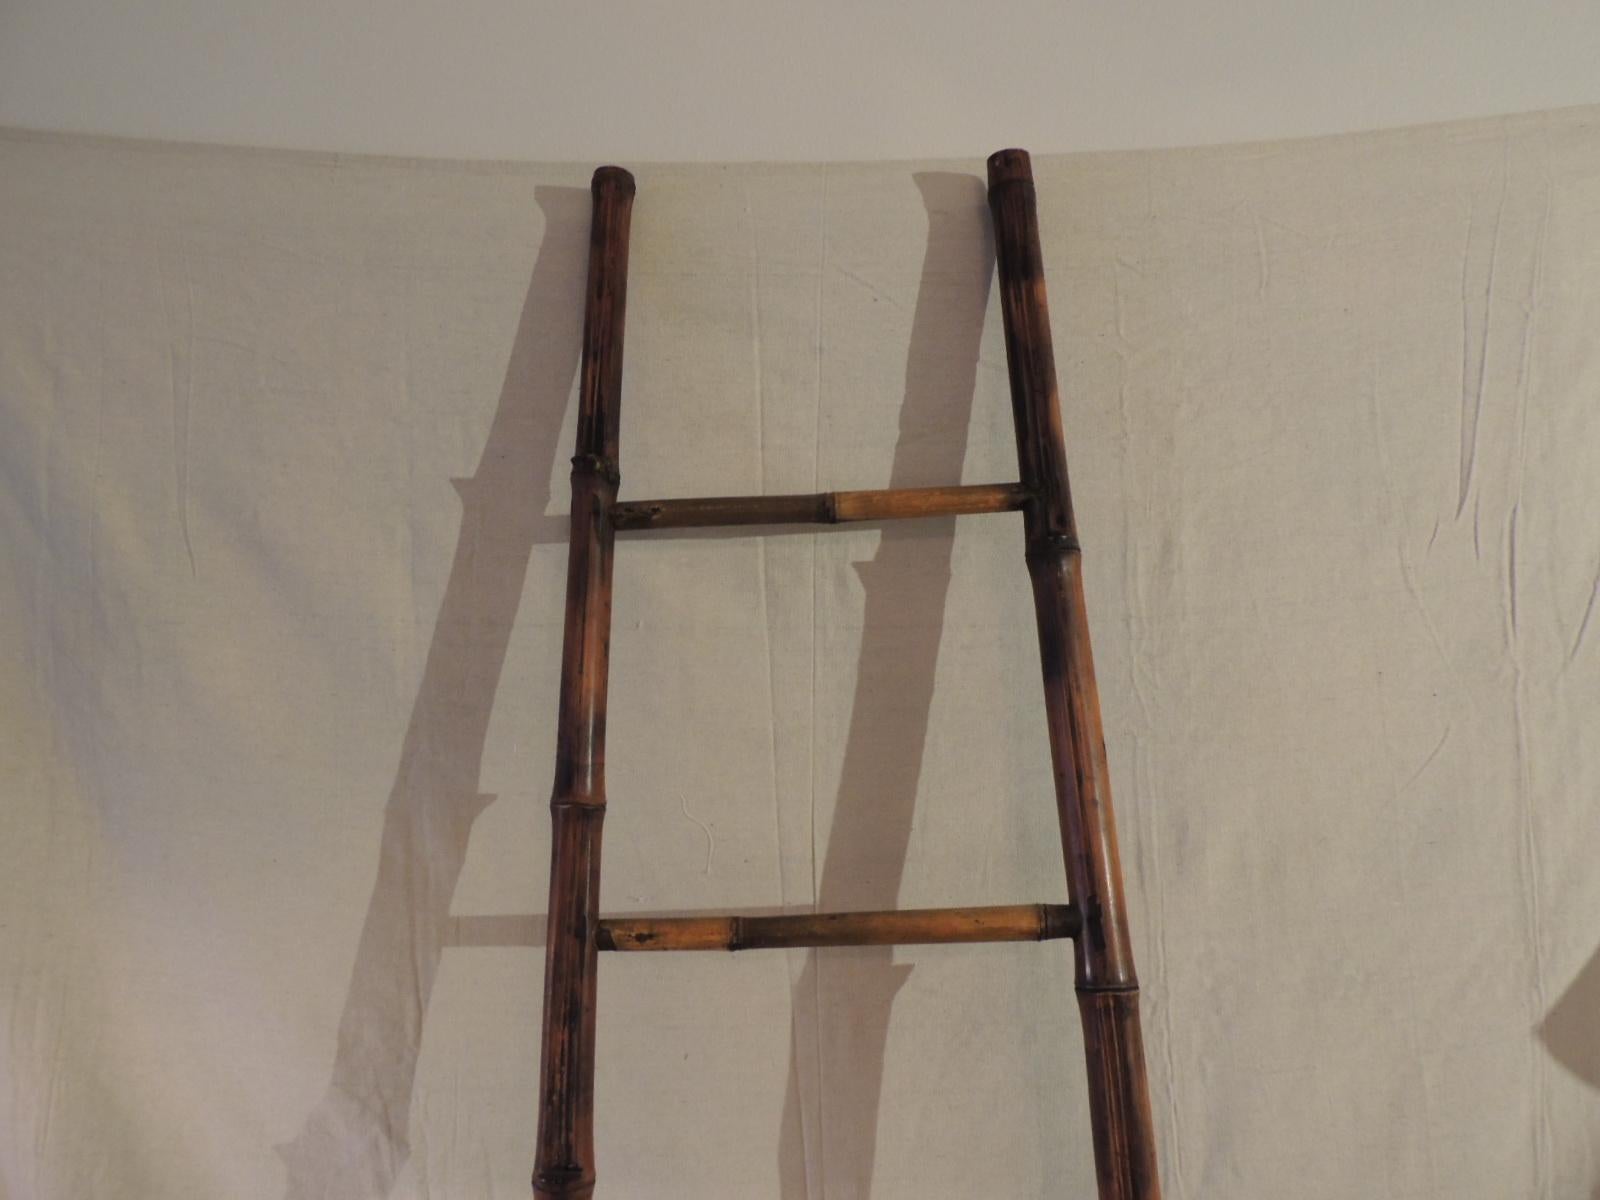 Vintage tall Asian bamboo ladder
Size: 17